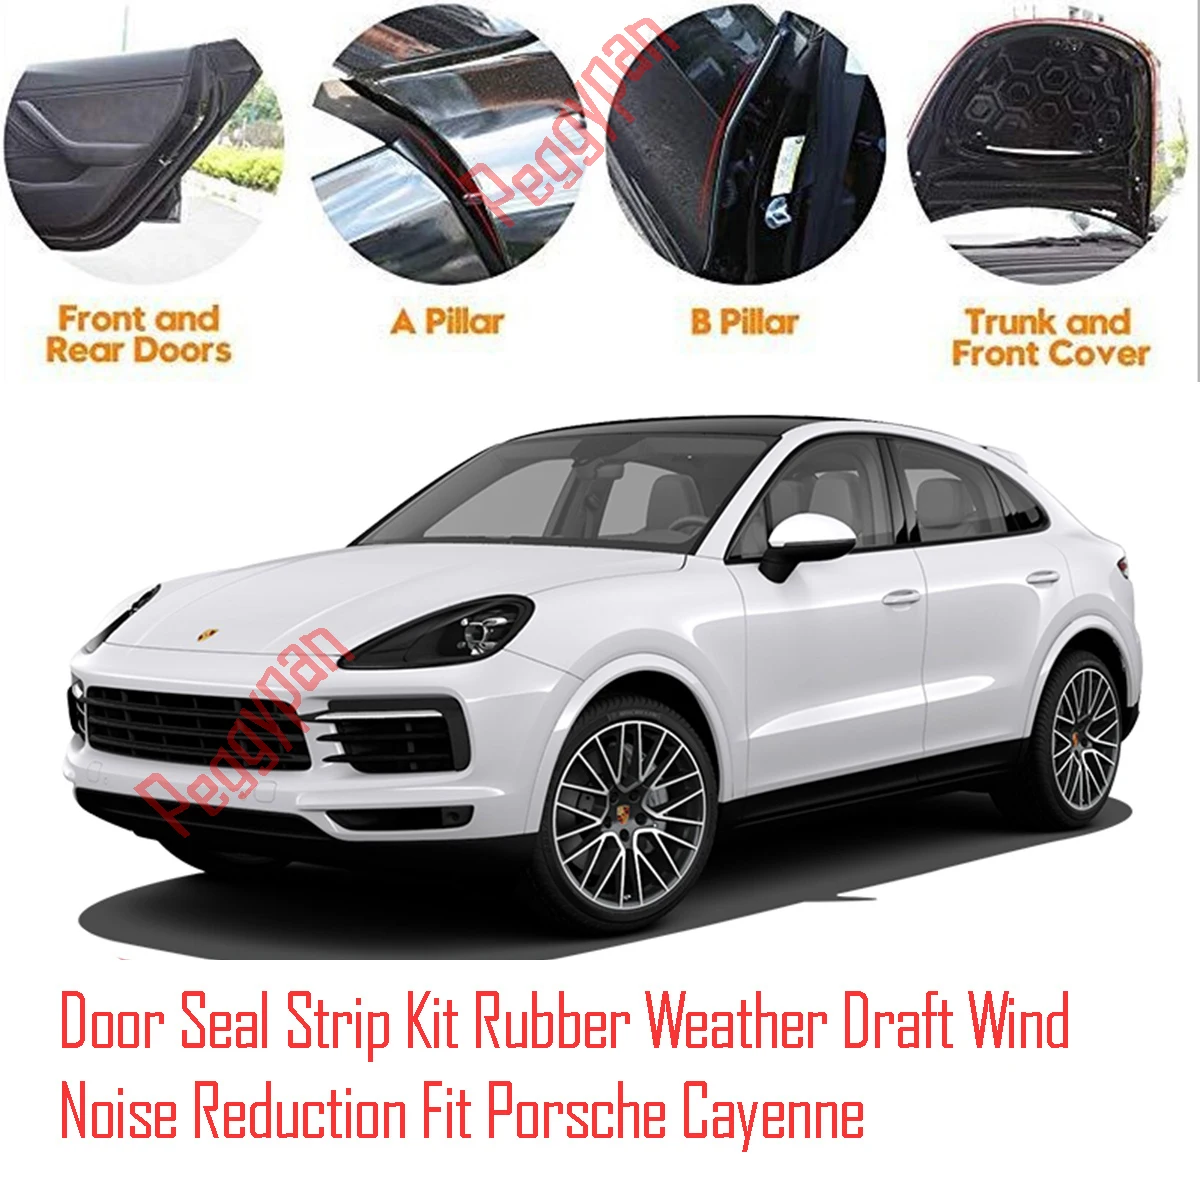 Door Seal Strip Kit Self Adhesive Window Engine Cover Soundproof Rubber Weather Draft Wind Noise Reduction For Porsche Cayenne